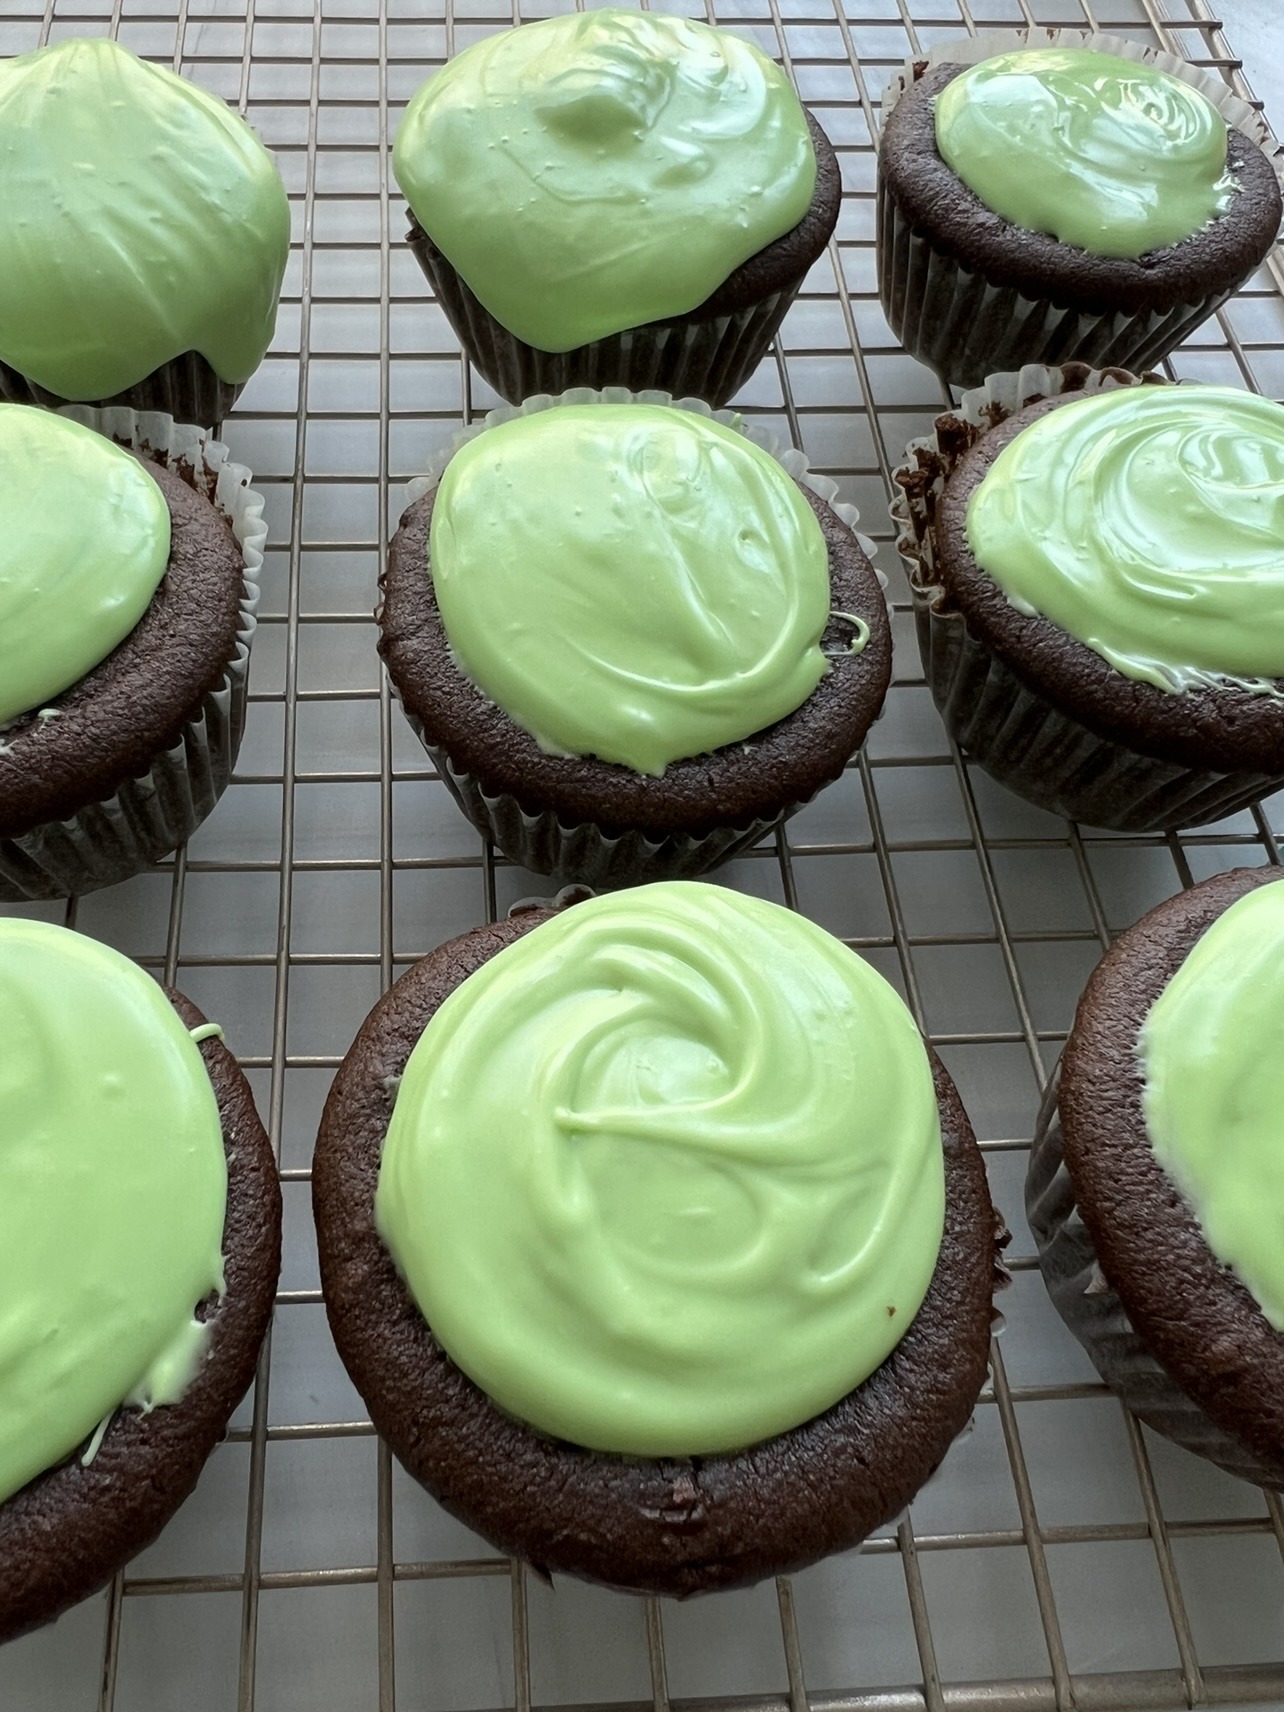 Step 5: Allow the cupcakes to cool before frosting and sprinkling them with green sprinkles. Enjoy!